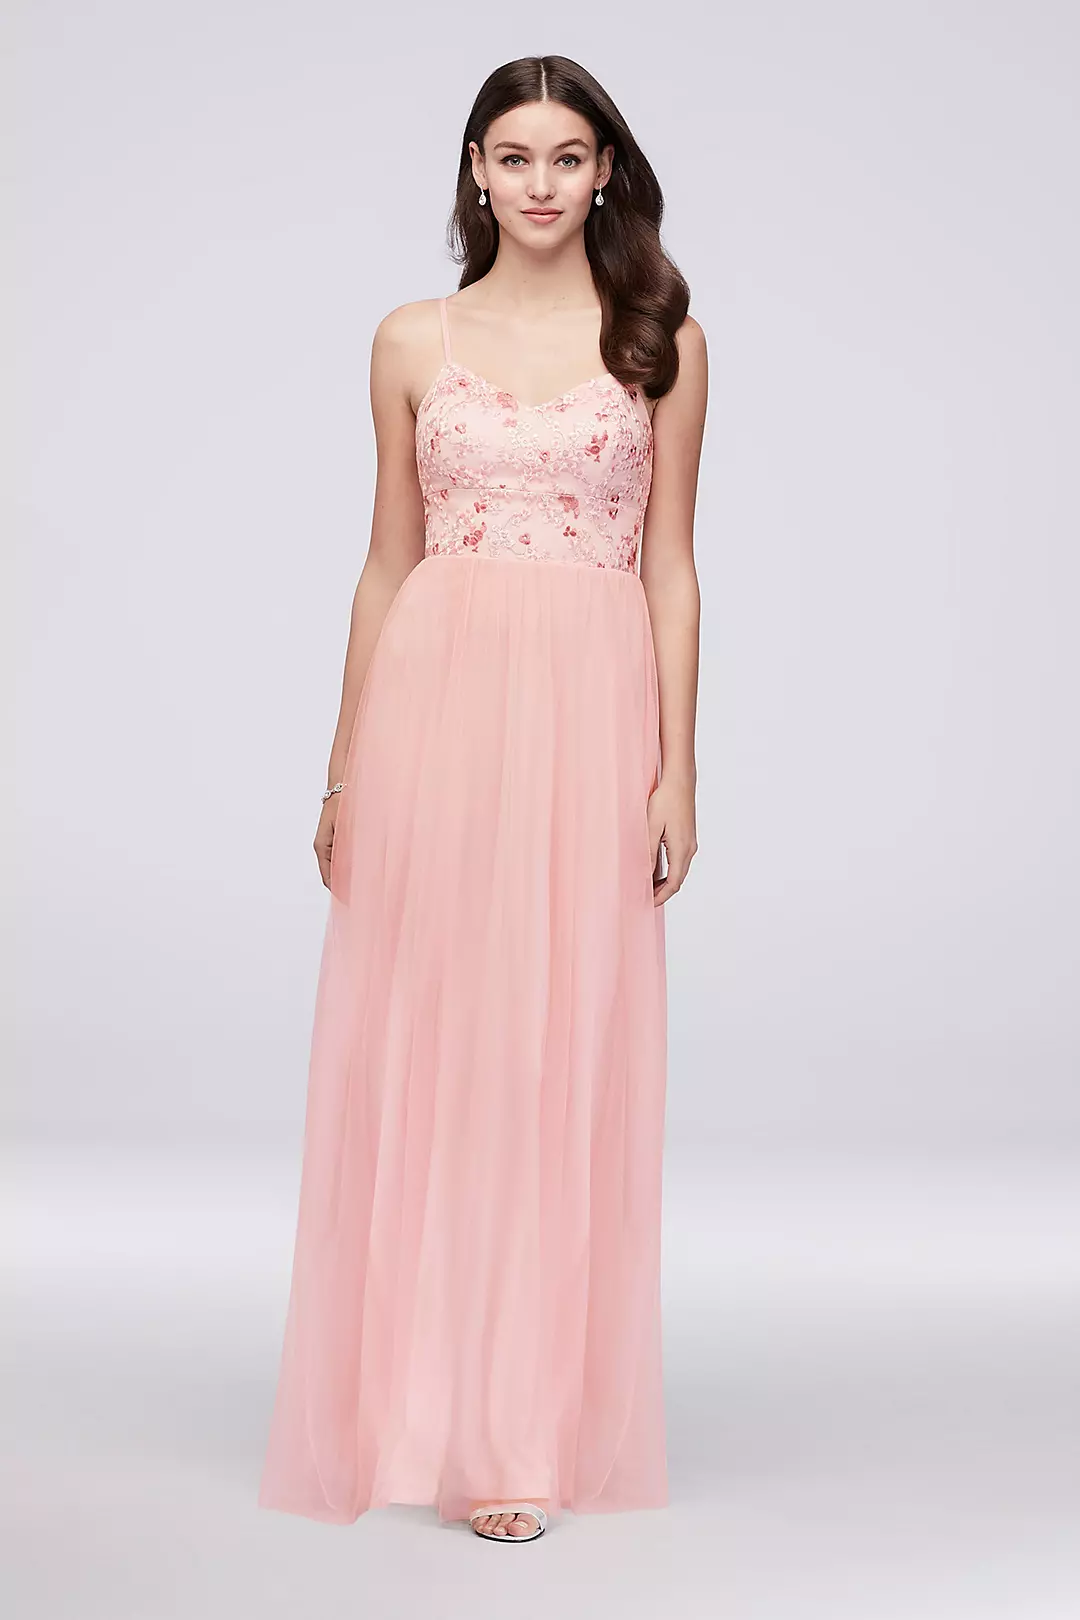 Tulle Bridesmaid Dress with Embroidered Bodice Image